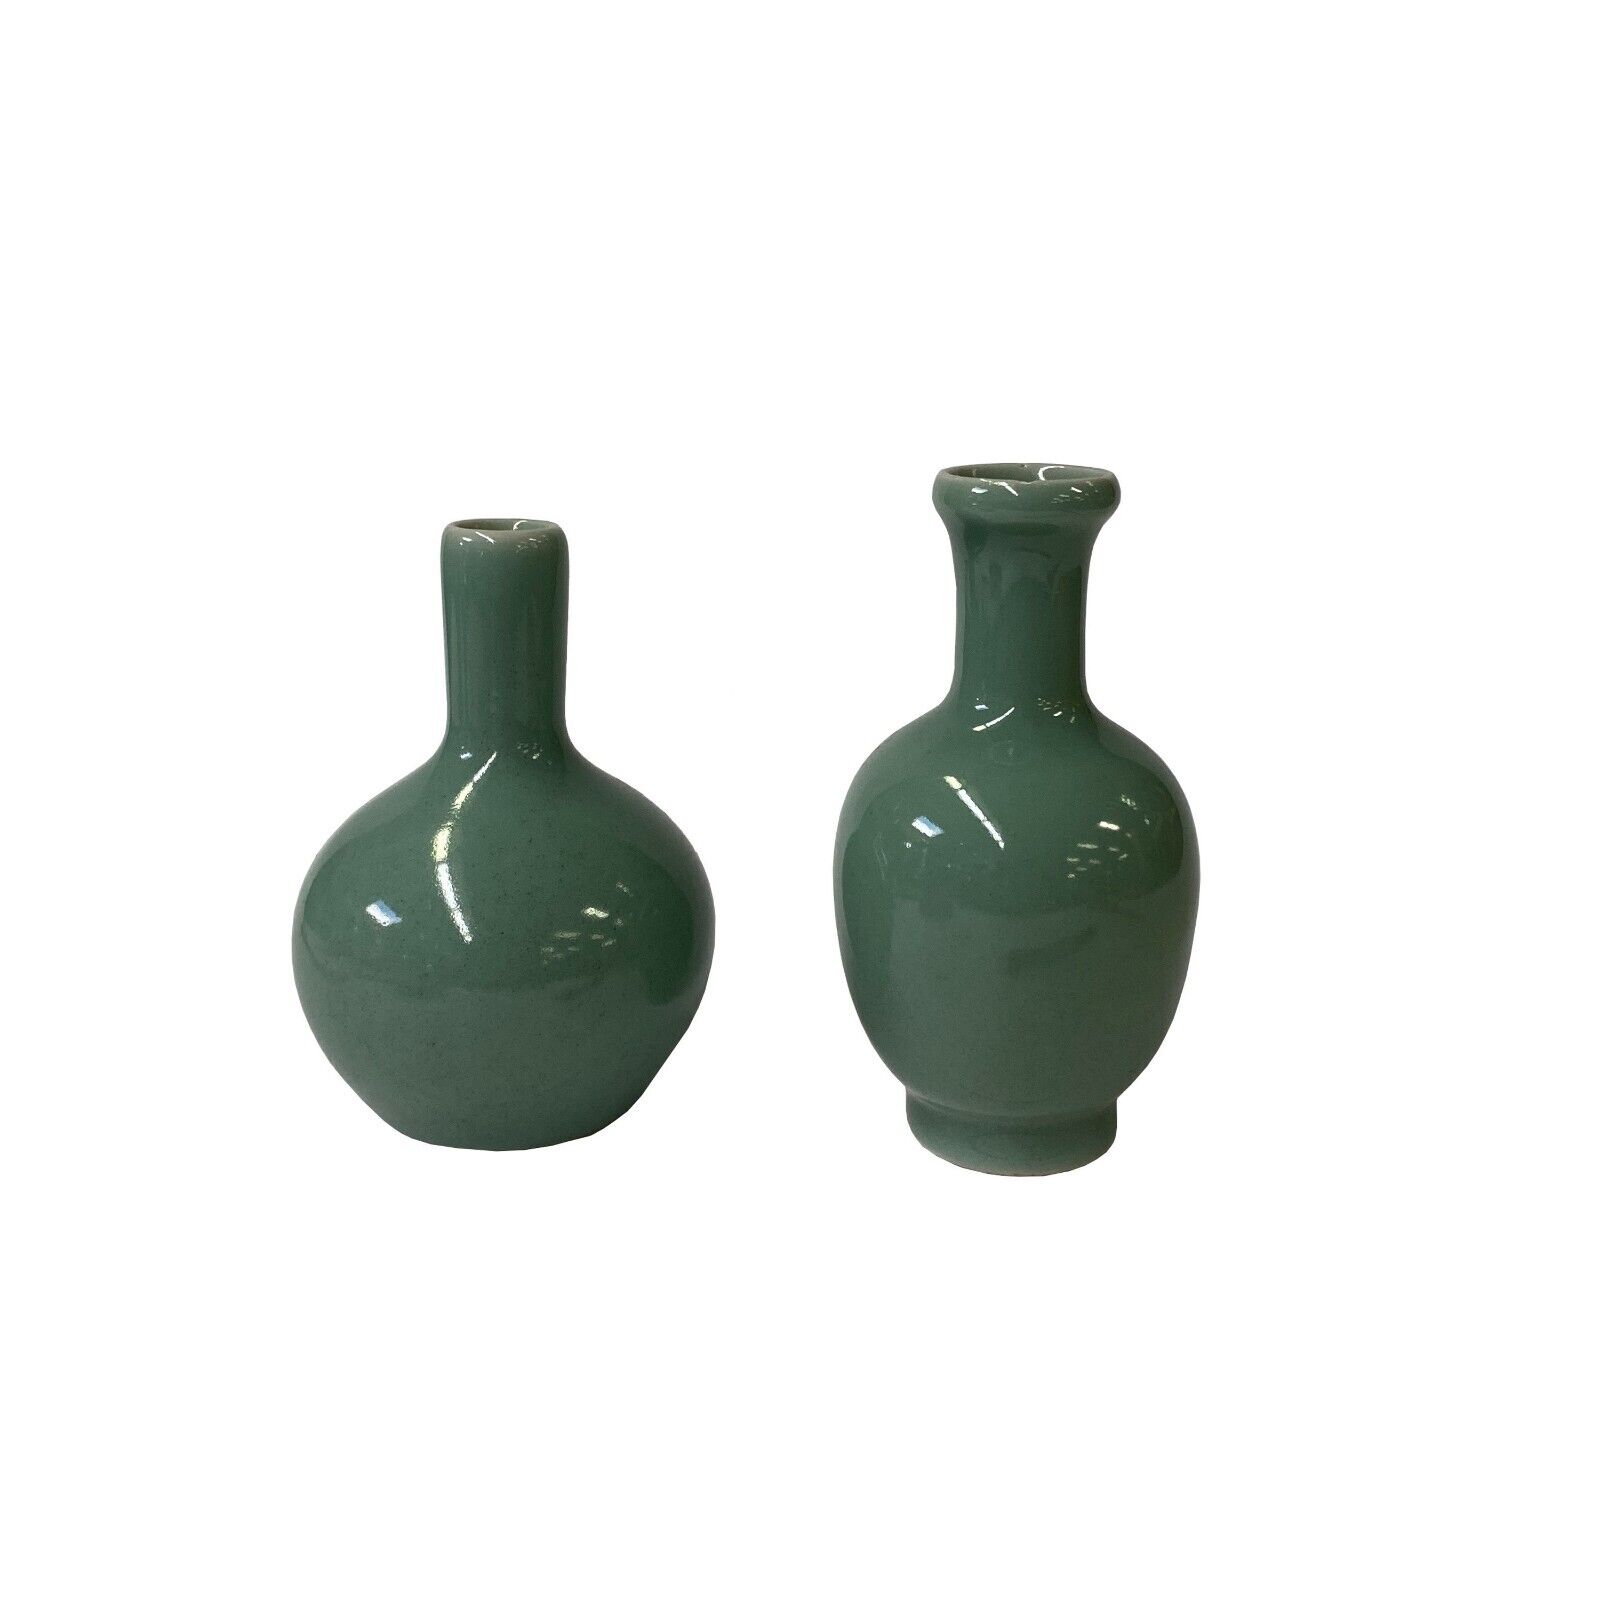 2 x Chinese Clay Ceramic Ware Wu Light Celadon Small Vase ws2811